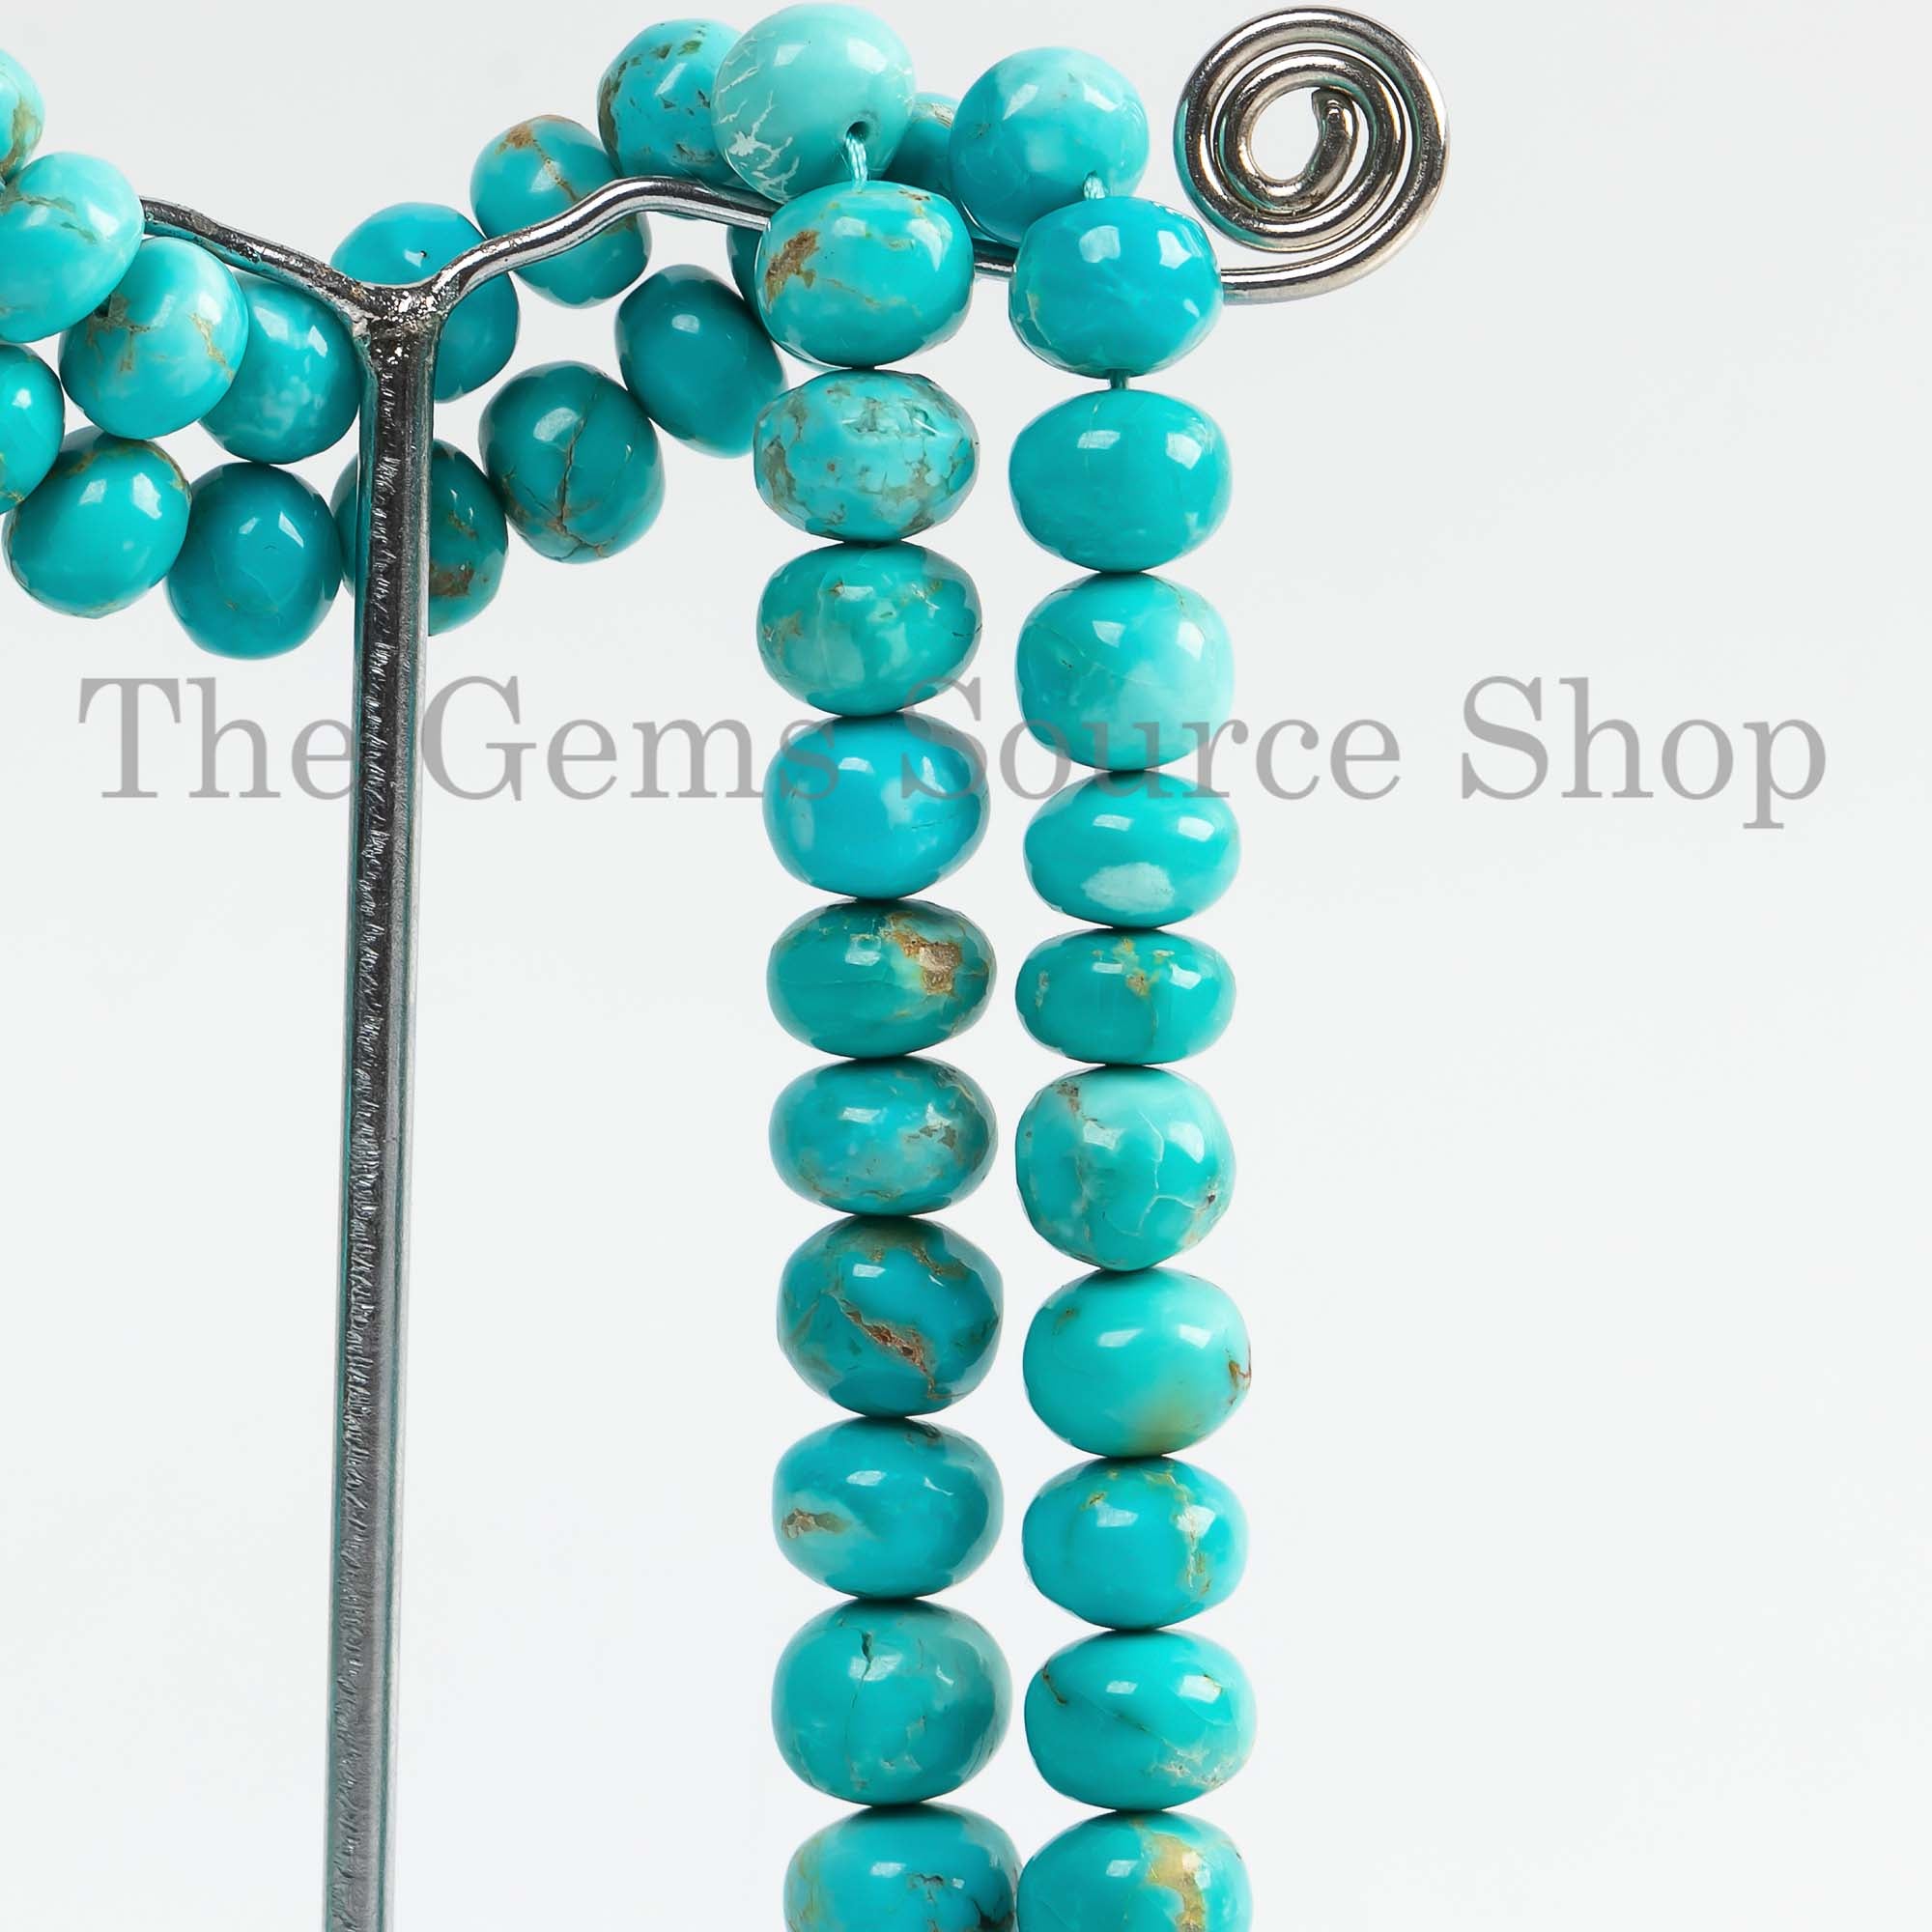 8-12mm Turquoise Smooth Rondelle Beads, Natural Turquoise ,Gemstone Beads, Jewelry Making Beads